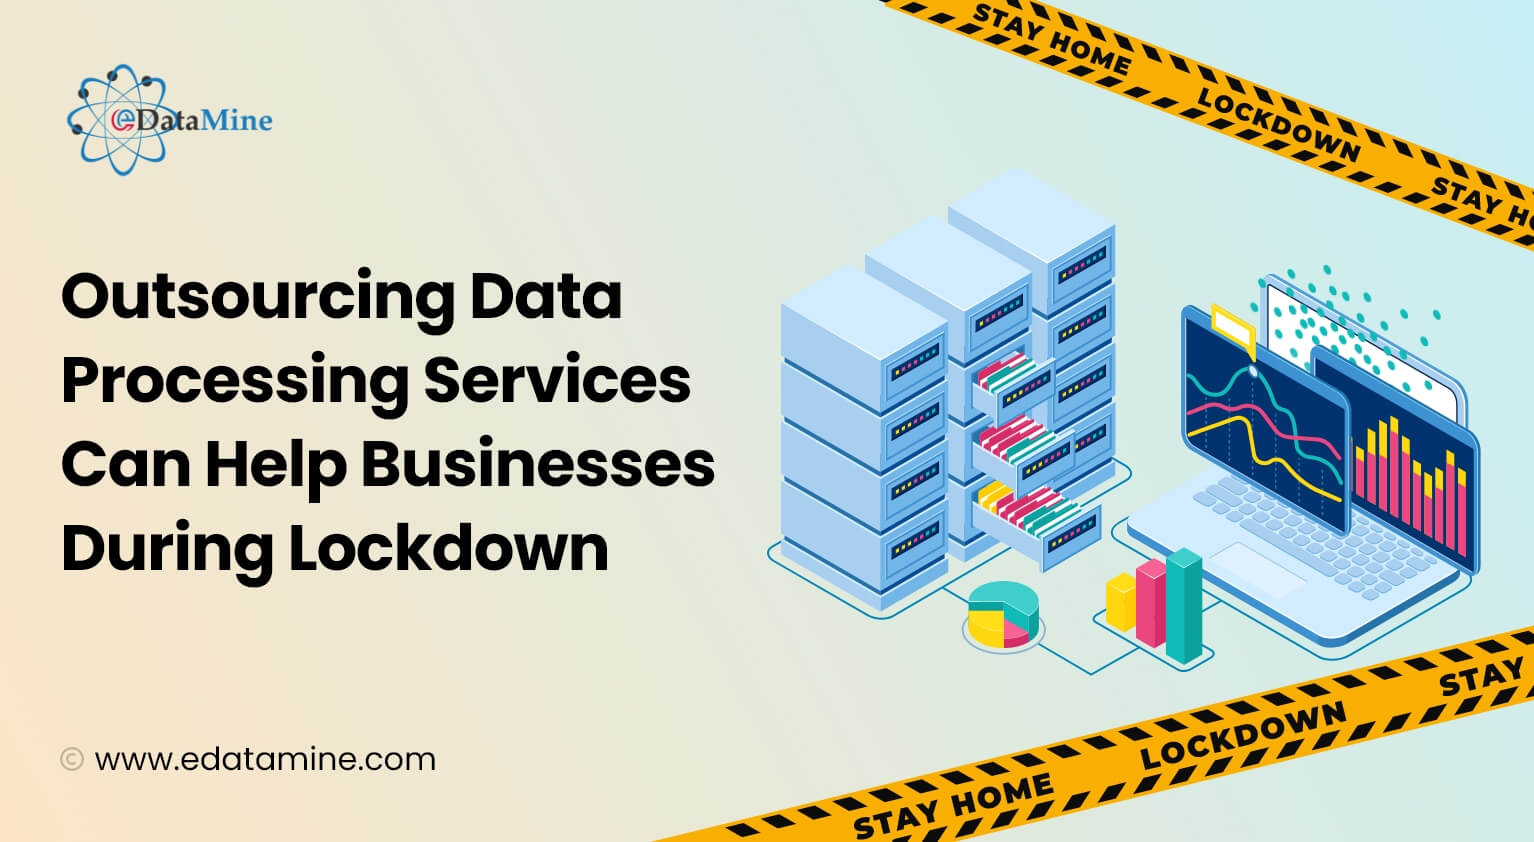 Outsourcing Data Processing Services Can Help Businesses During Lockdown